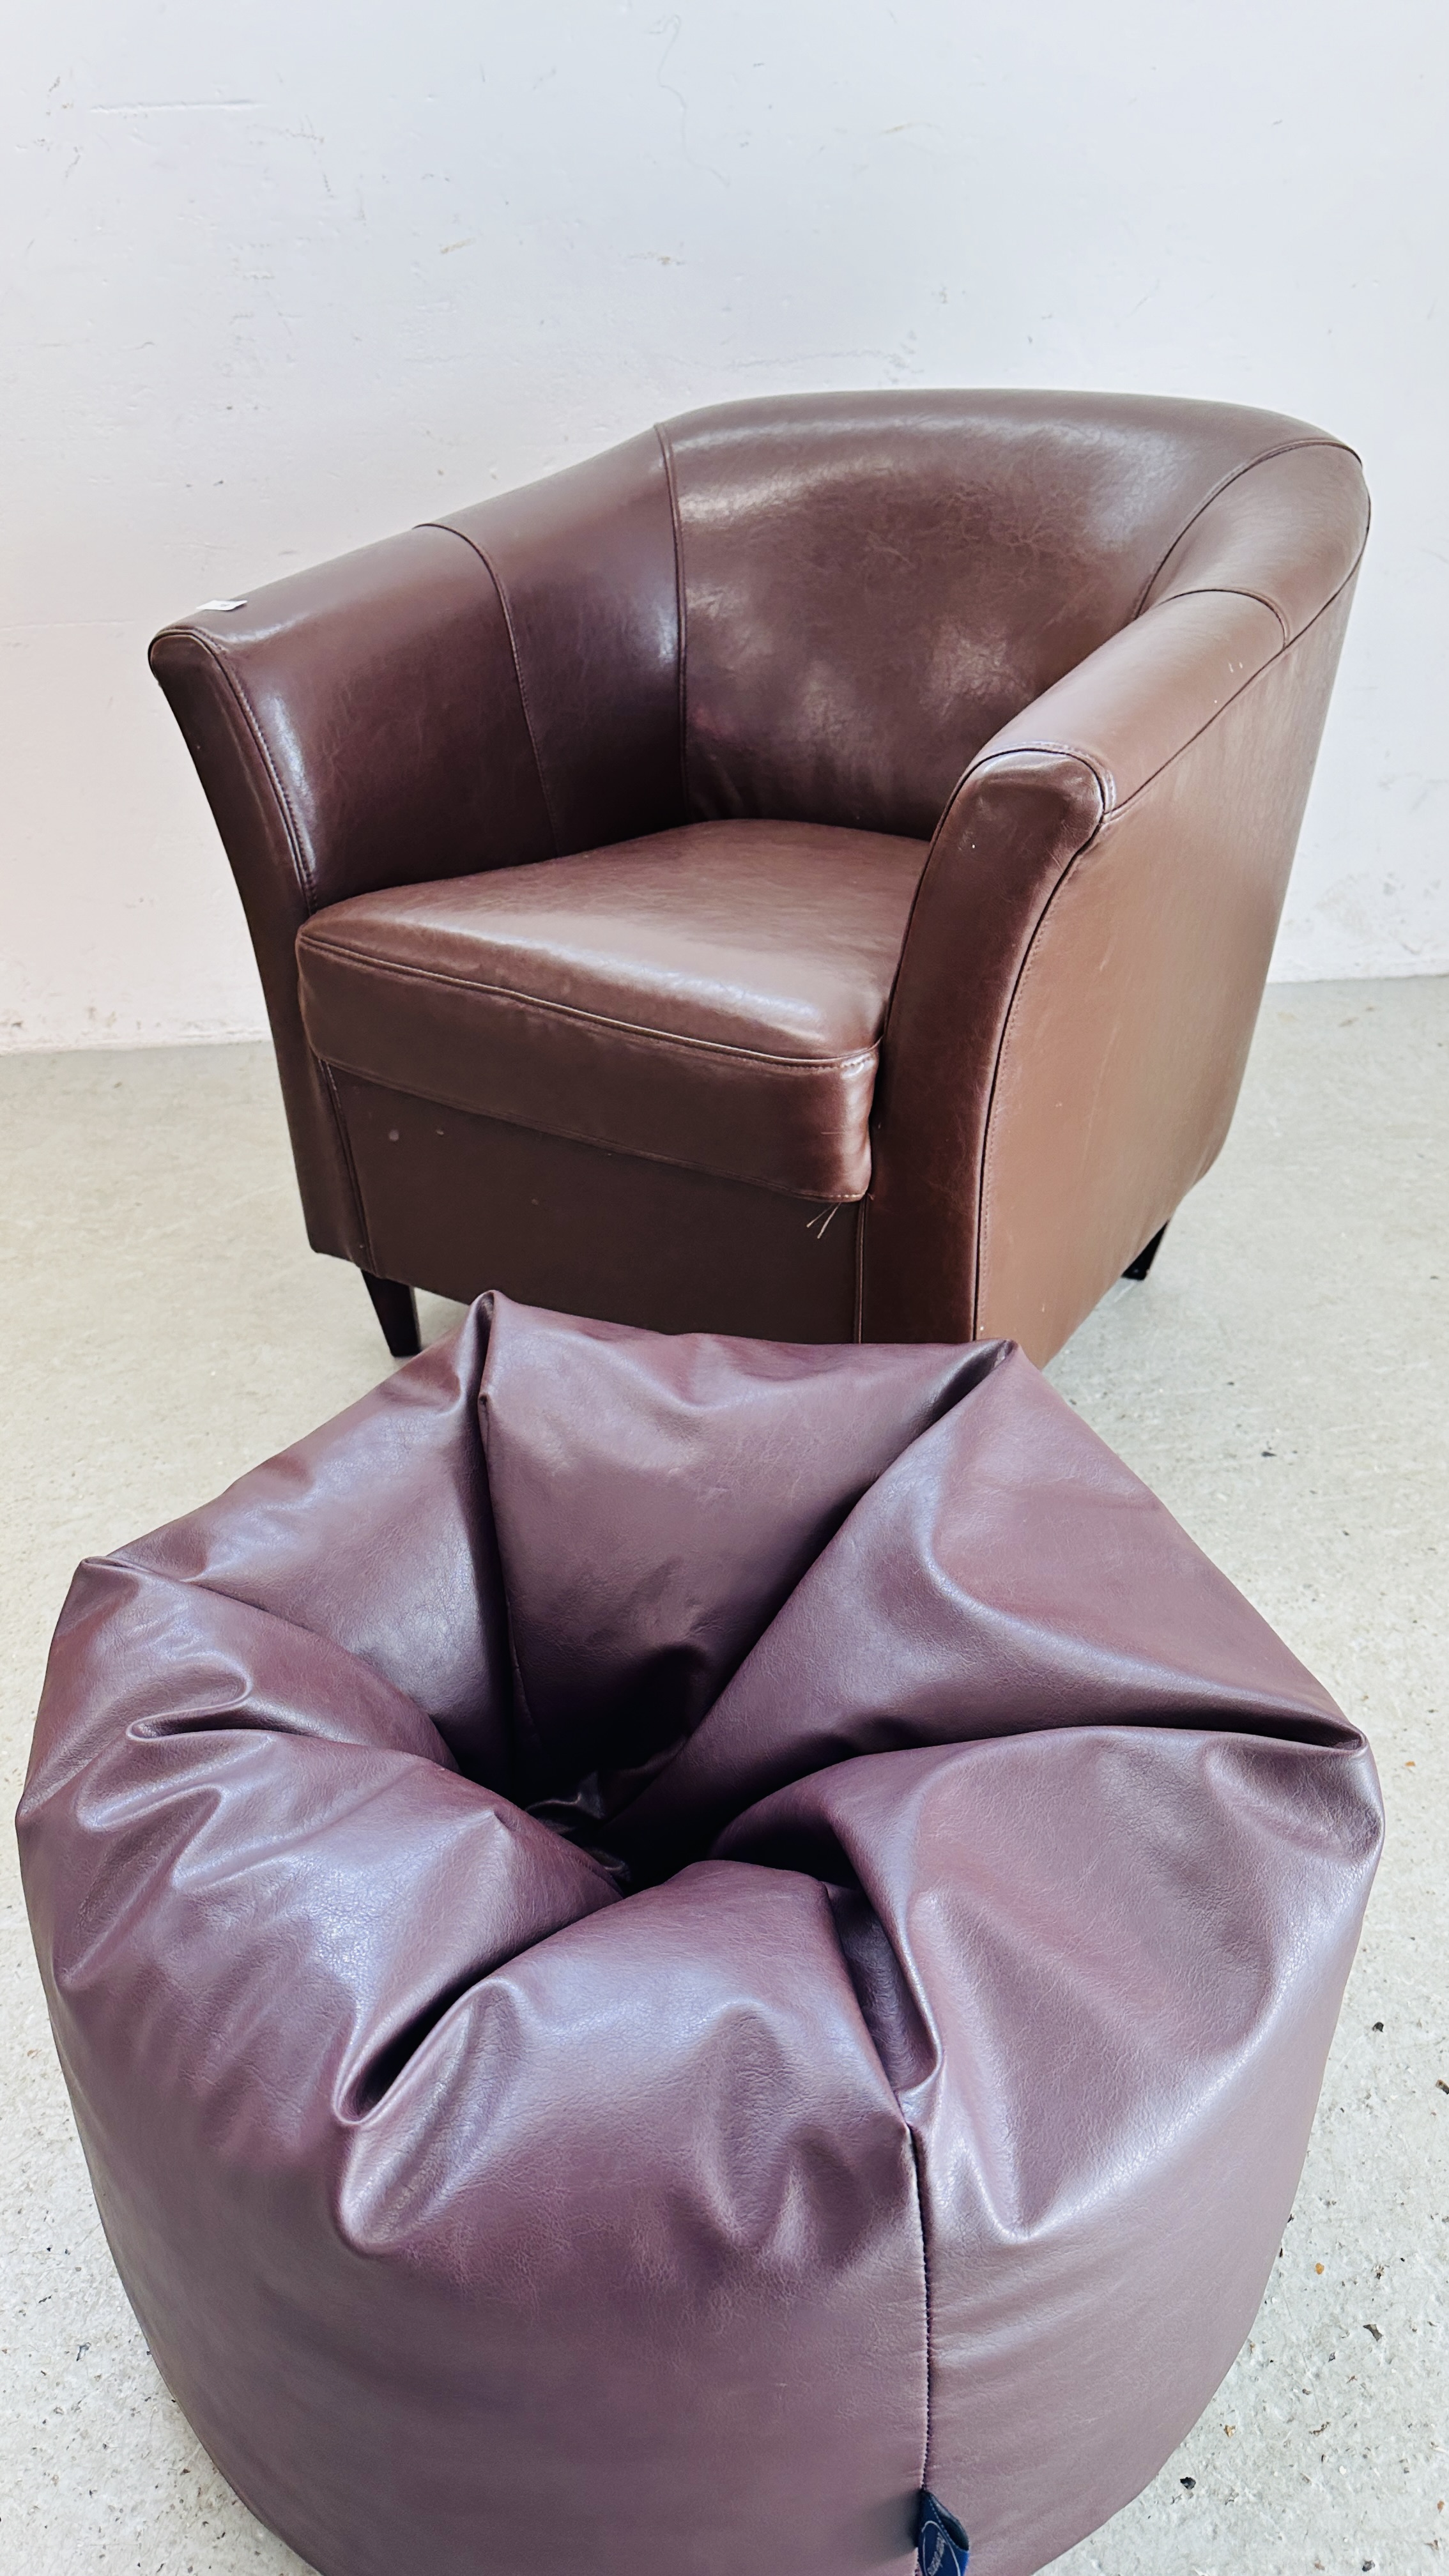 A MODERN BROWN FAUX LEATHER TUB CHAIR ALONG WITH MATCHING BEAN BAG FOOT REST. - Image 10 of 11